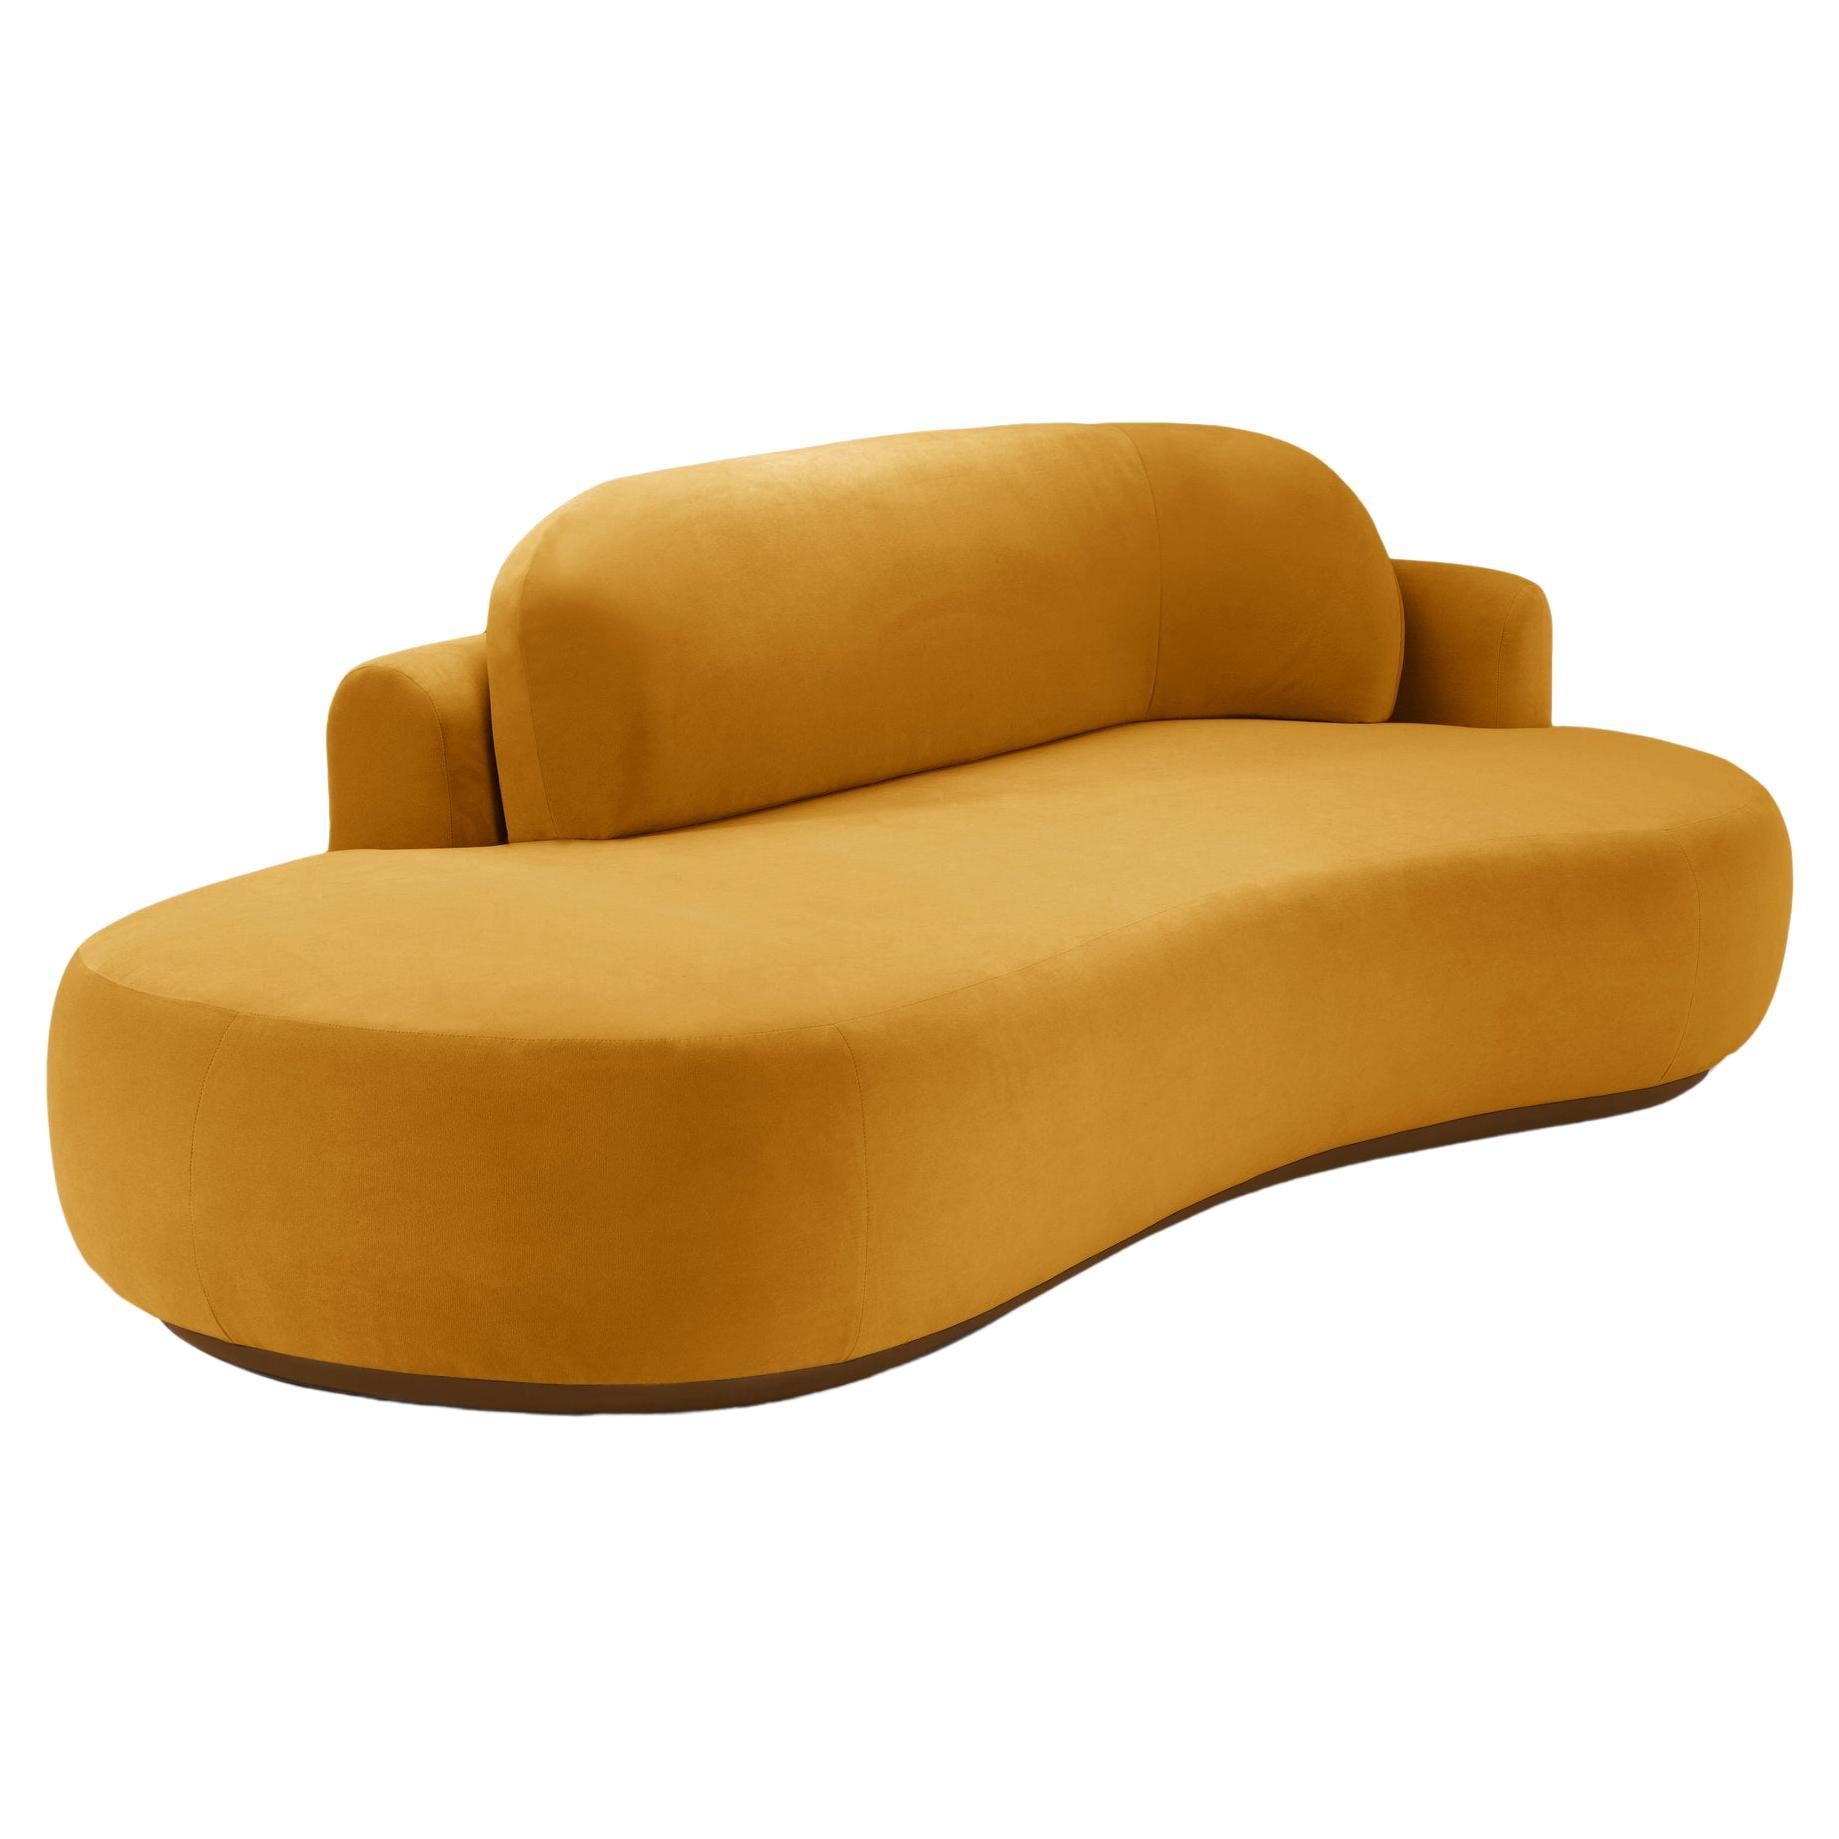 Naked Sofa Single with Beech Ash-056-1 and Corn For Sale